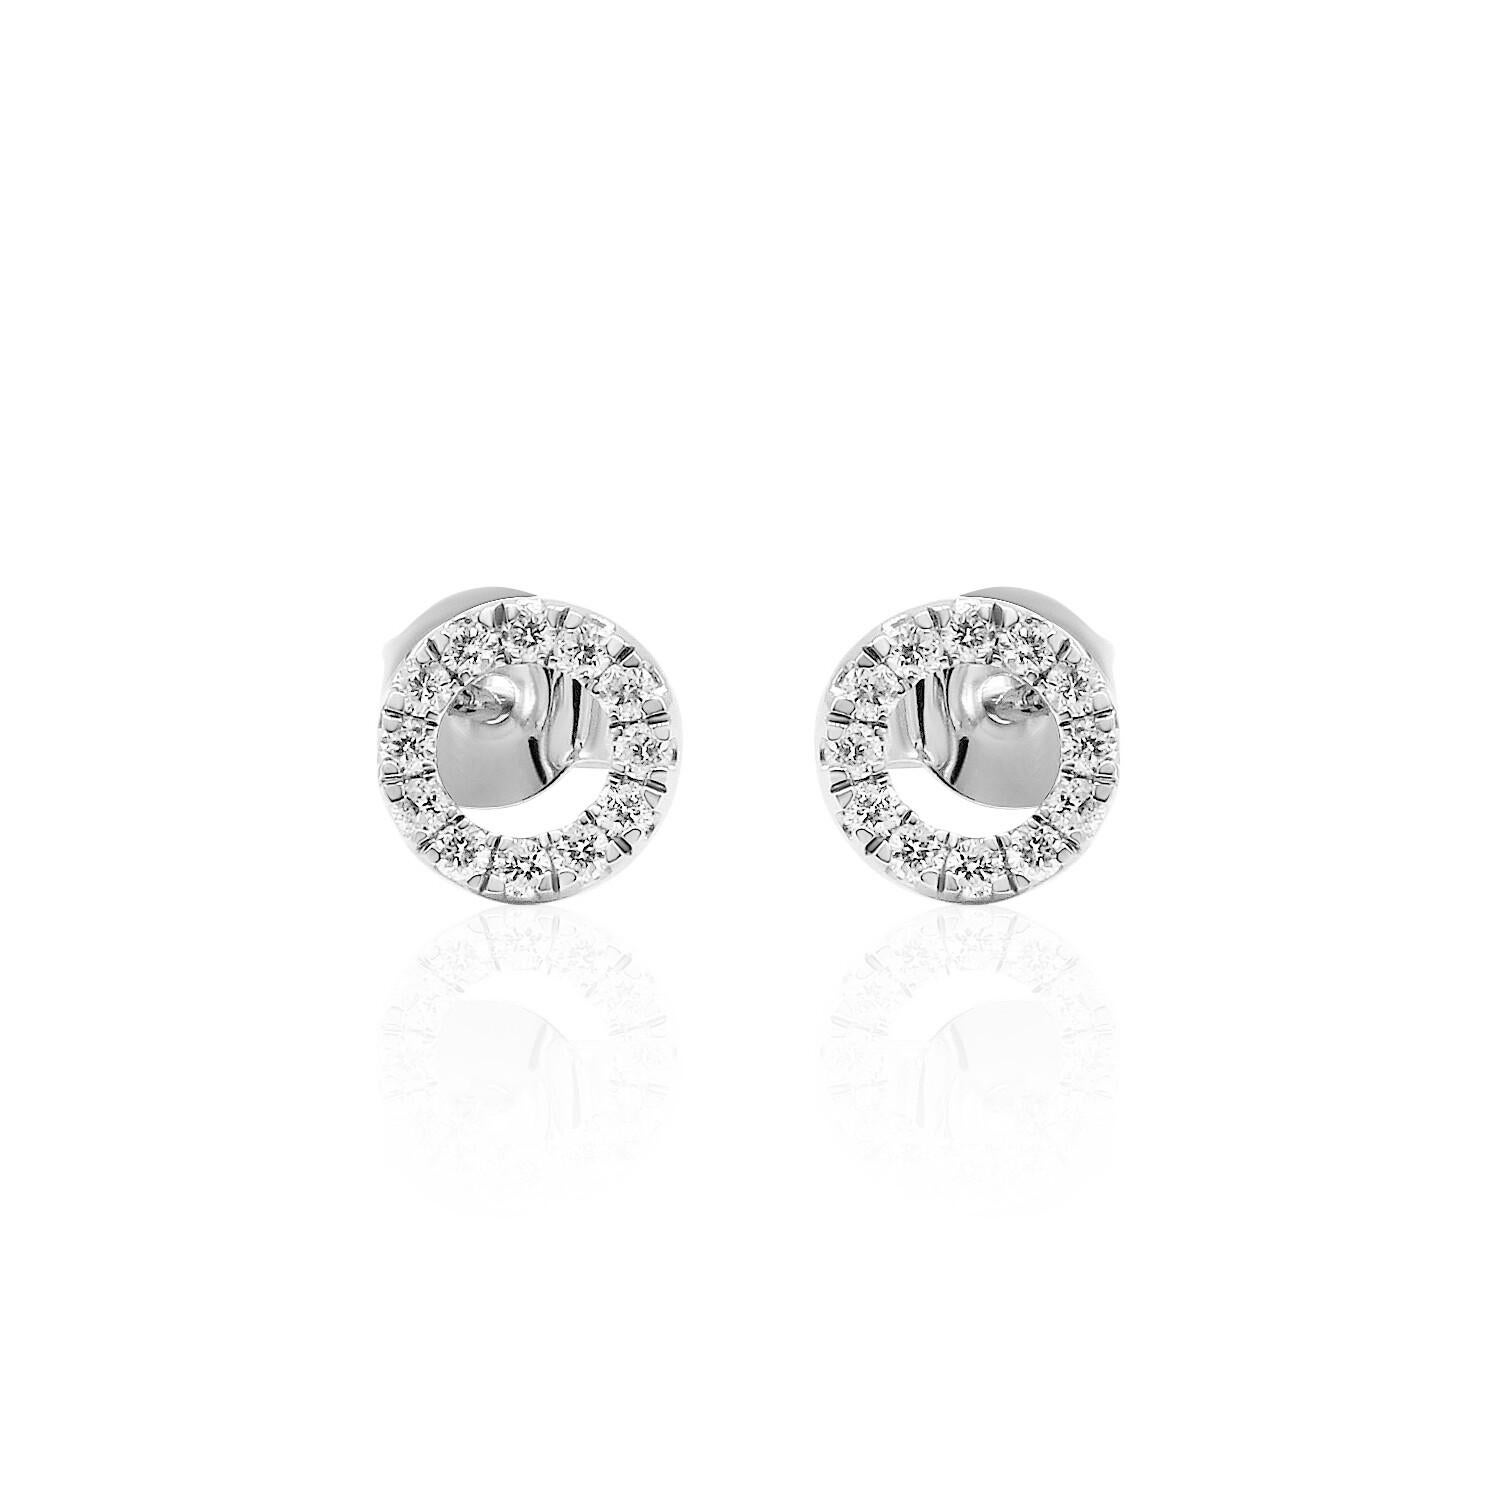 Stunning Circle Diamond Stud Earrings, featuring:
✧ 24 natural earth mined diamonds G-H color VS-SI weighing 0.22 carats 
✧ Measurements: 7mm*7mm
✧ Available in 14K White, Yellow, and Rose Gold
✧ Free appraisal included with your purchase
✧ Comes